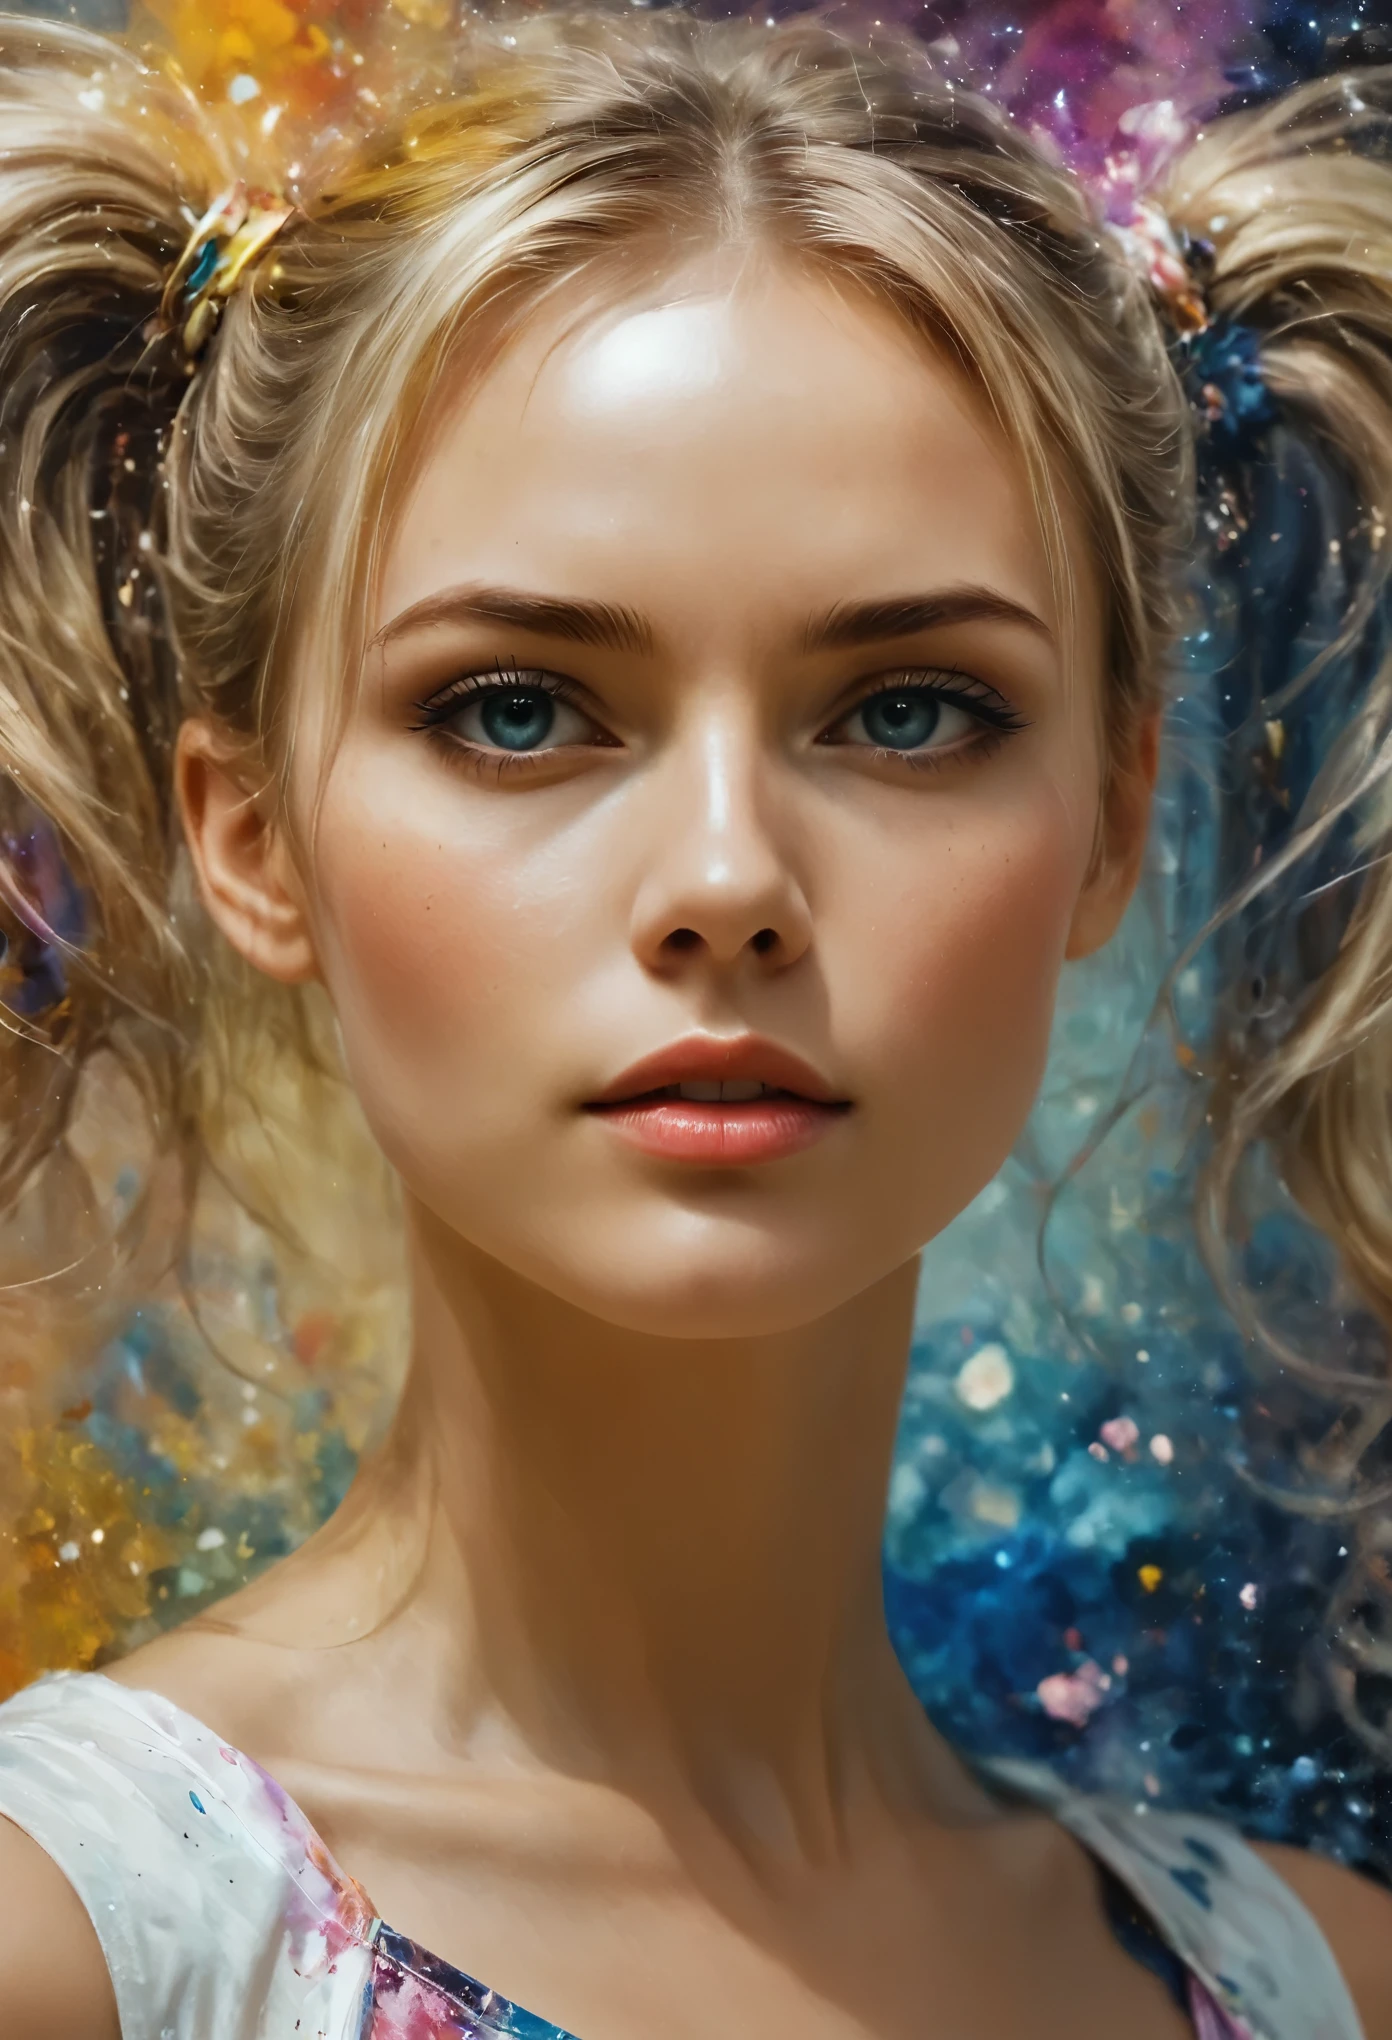 (Best quality, watercolor painting, colorful, sharp focus), (full body, wide angle shot), Drawing of Supermodel English Beauty. Blonde hair, ((twin tails hairstyle):1.2), ((fresh)), golden ratio face, perfect face, (attractive body), (fashion model body), ,Jackson Pollock action painting, kinetic expression, colorful hair, (Splash and Drip Art Minimalism:1.1), van gogh star moon sky background, studio, style painting magic. | (perfect_composition, perfect_design, perfect_layout, perfect_detail, ultra_detailed)), ((enhance_all, fix_everything)), More Detail, Enhance.